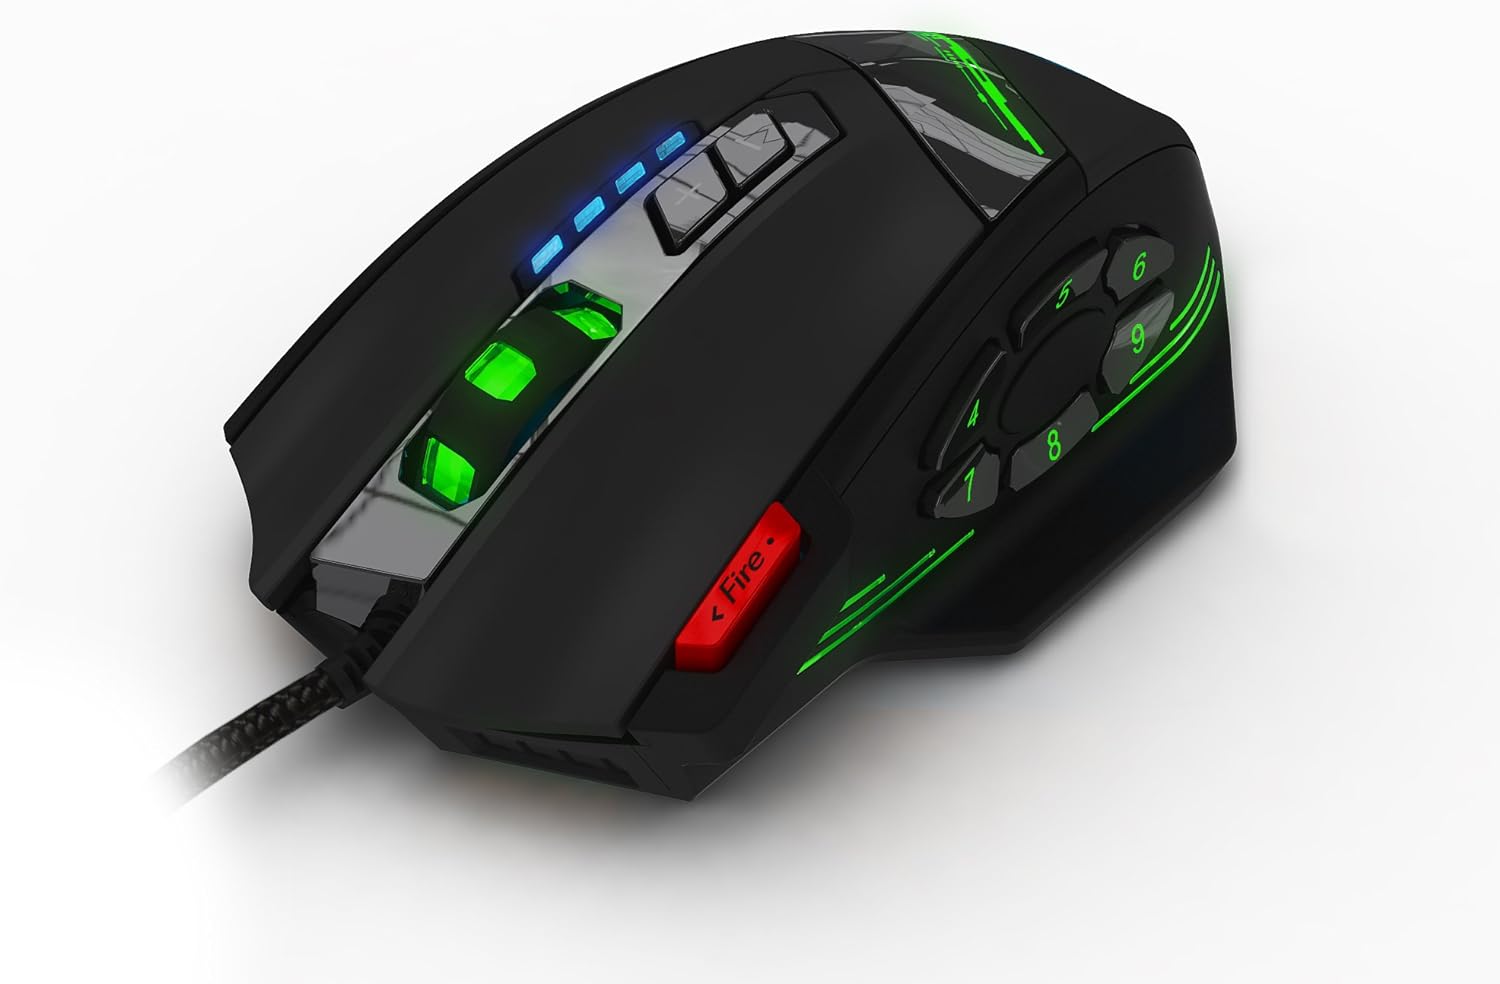 AFUNTA 12 Programmable Buttons Zelotes C12 Gaming Mouse, AFUNTA Laser double-speed adjustment 8000DPI Mice Support 4 level switch